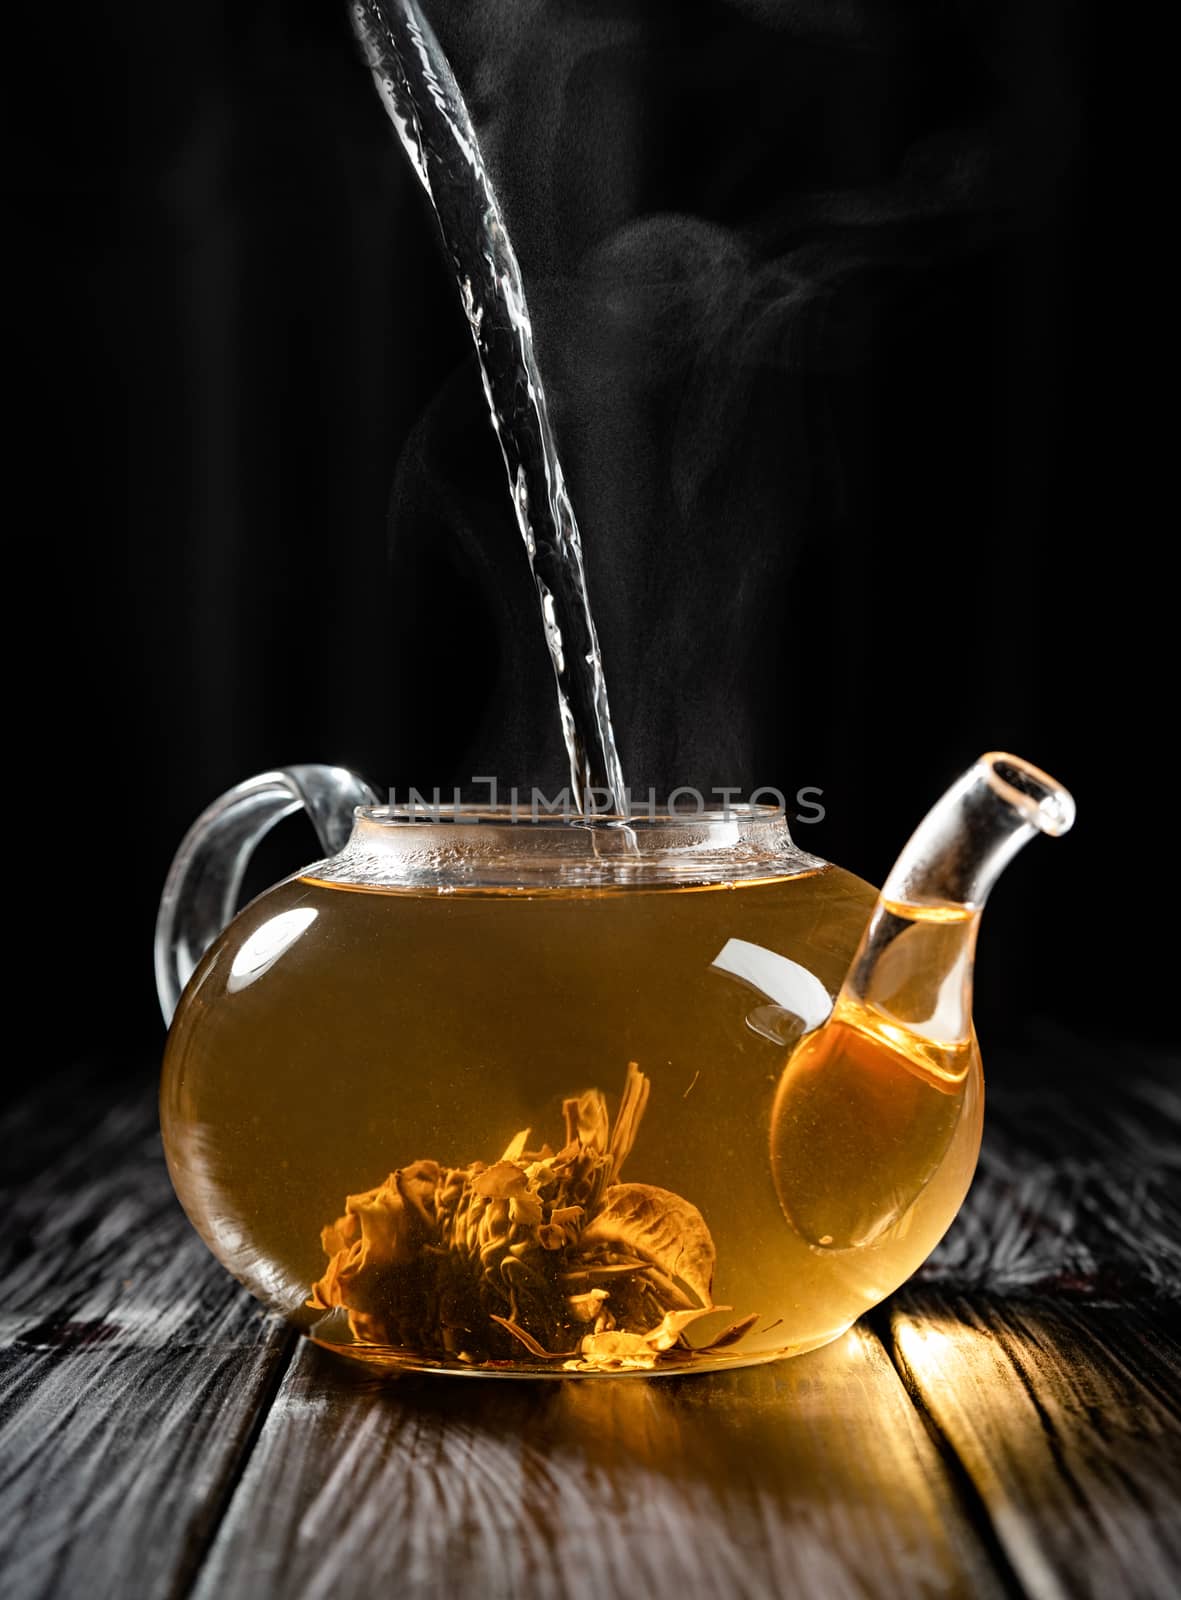 Brewing tea. Glass teapot with hot tea and steam. Hot water pouring into the teapot front view dark background